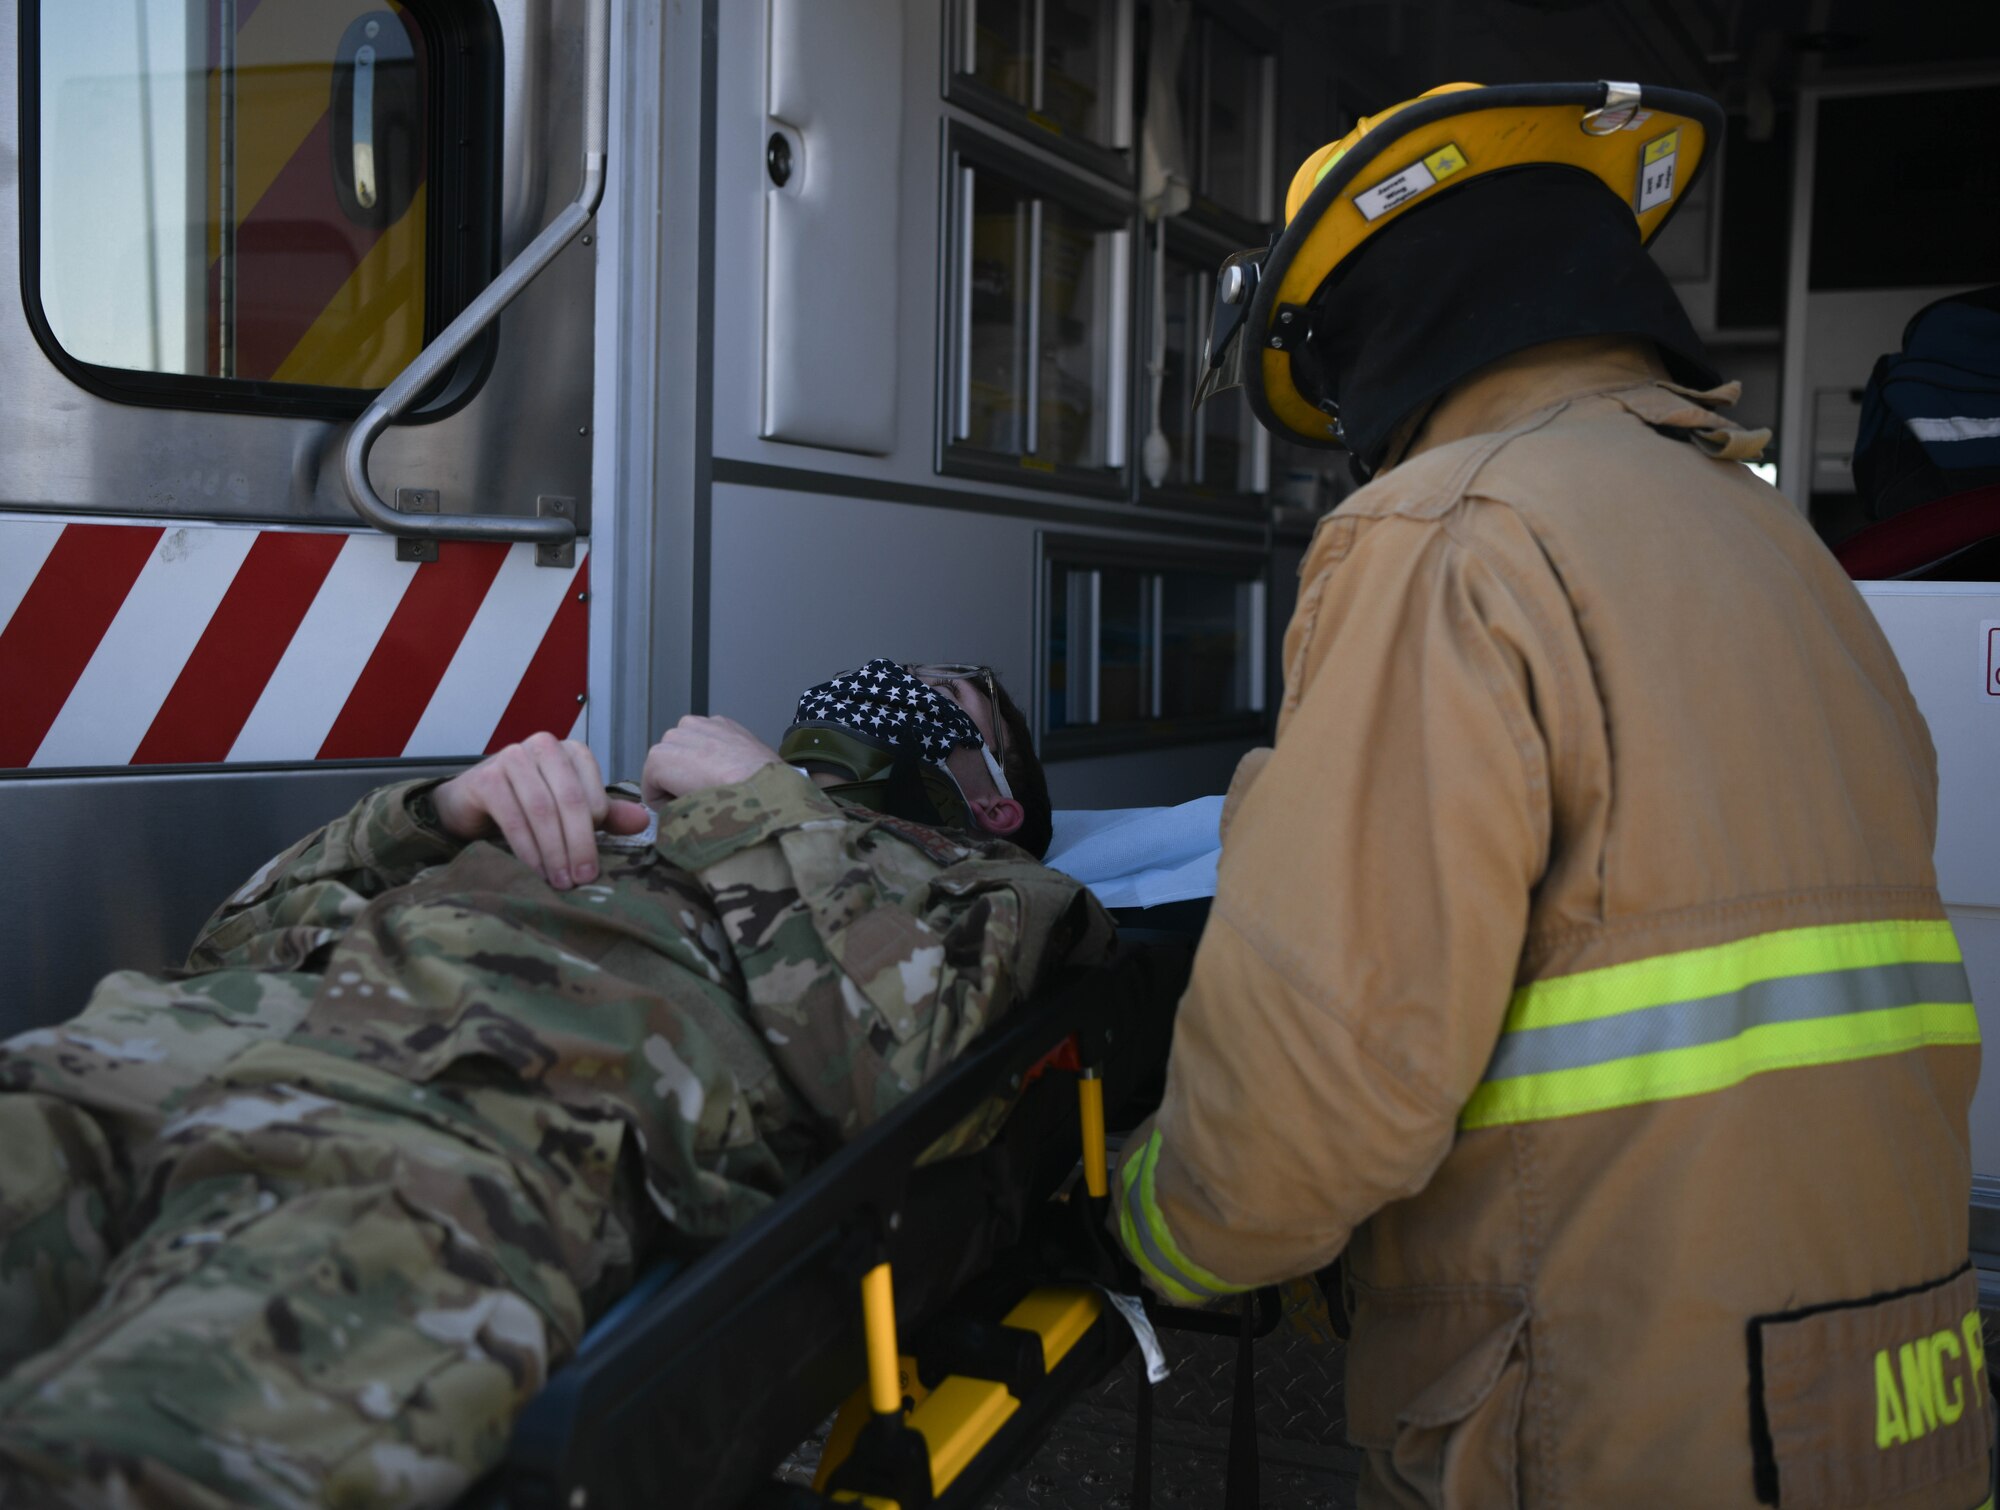 A firefighter from the 380th Expeditionary Civil Engineer Squadron wheels a victim into an ambulance during the Major Accident Response Exercise (MARE) September 3, 2020, at Al Dhafra Air Base, United Arab Emirates.